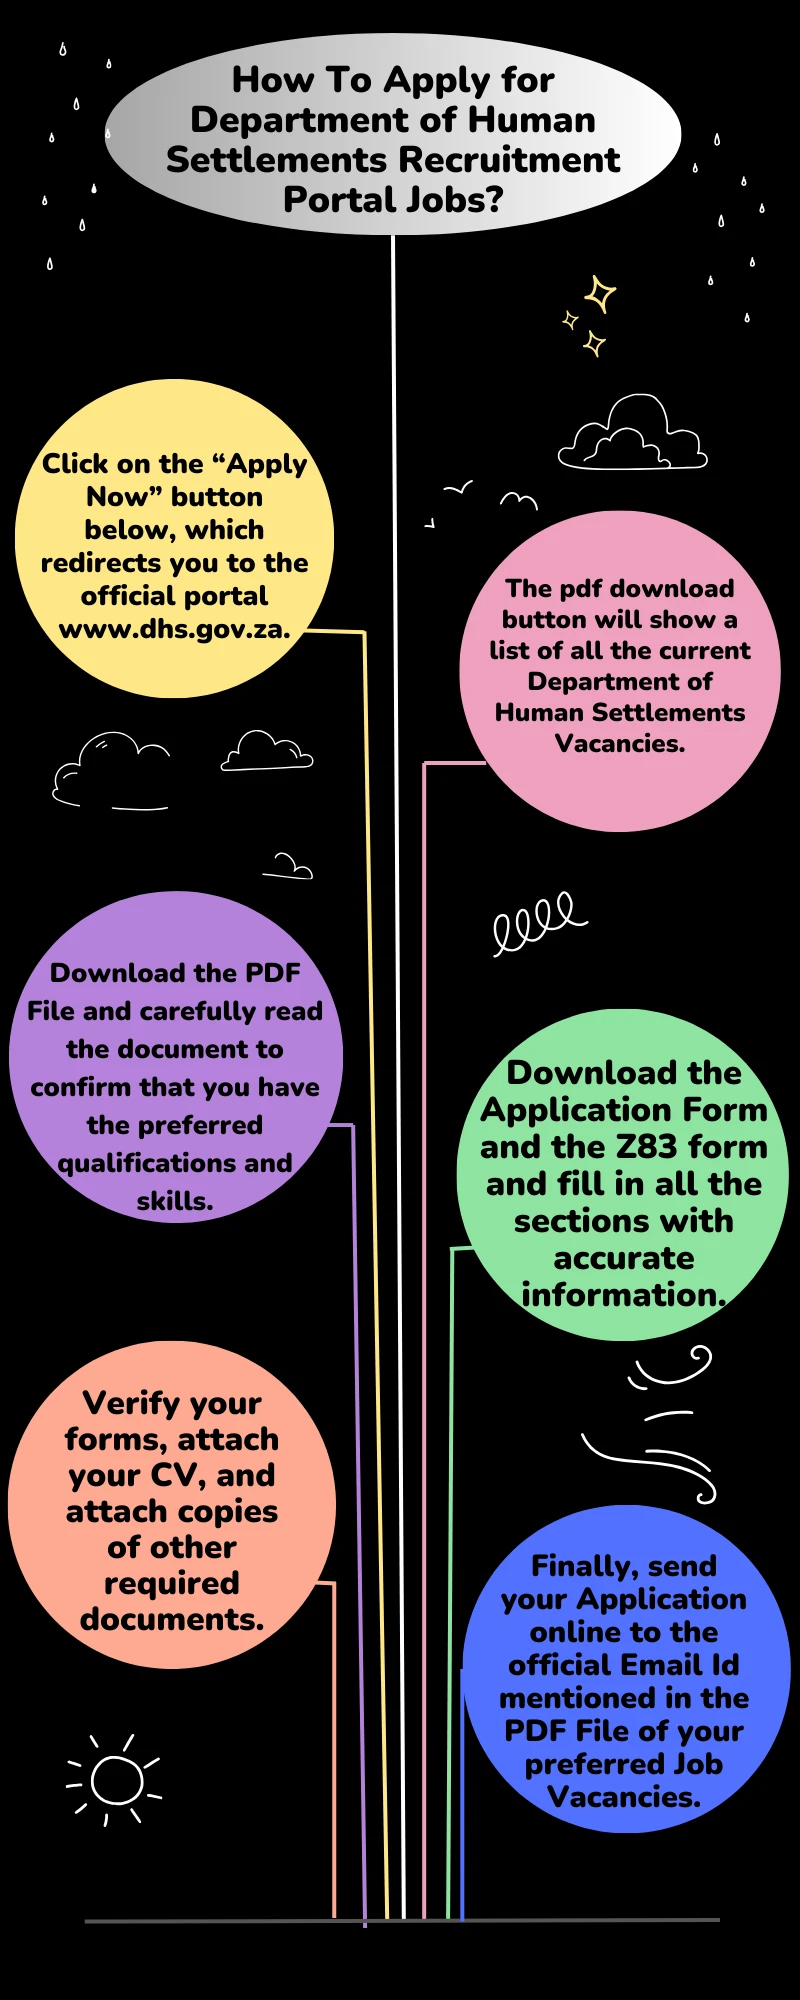 How To Apply for Department of Human Settlements Recruitment Portal Jobs?